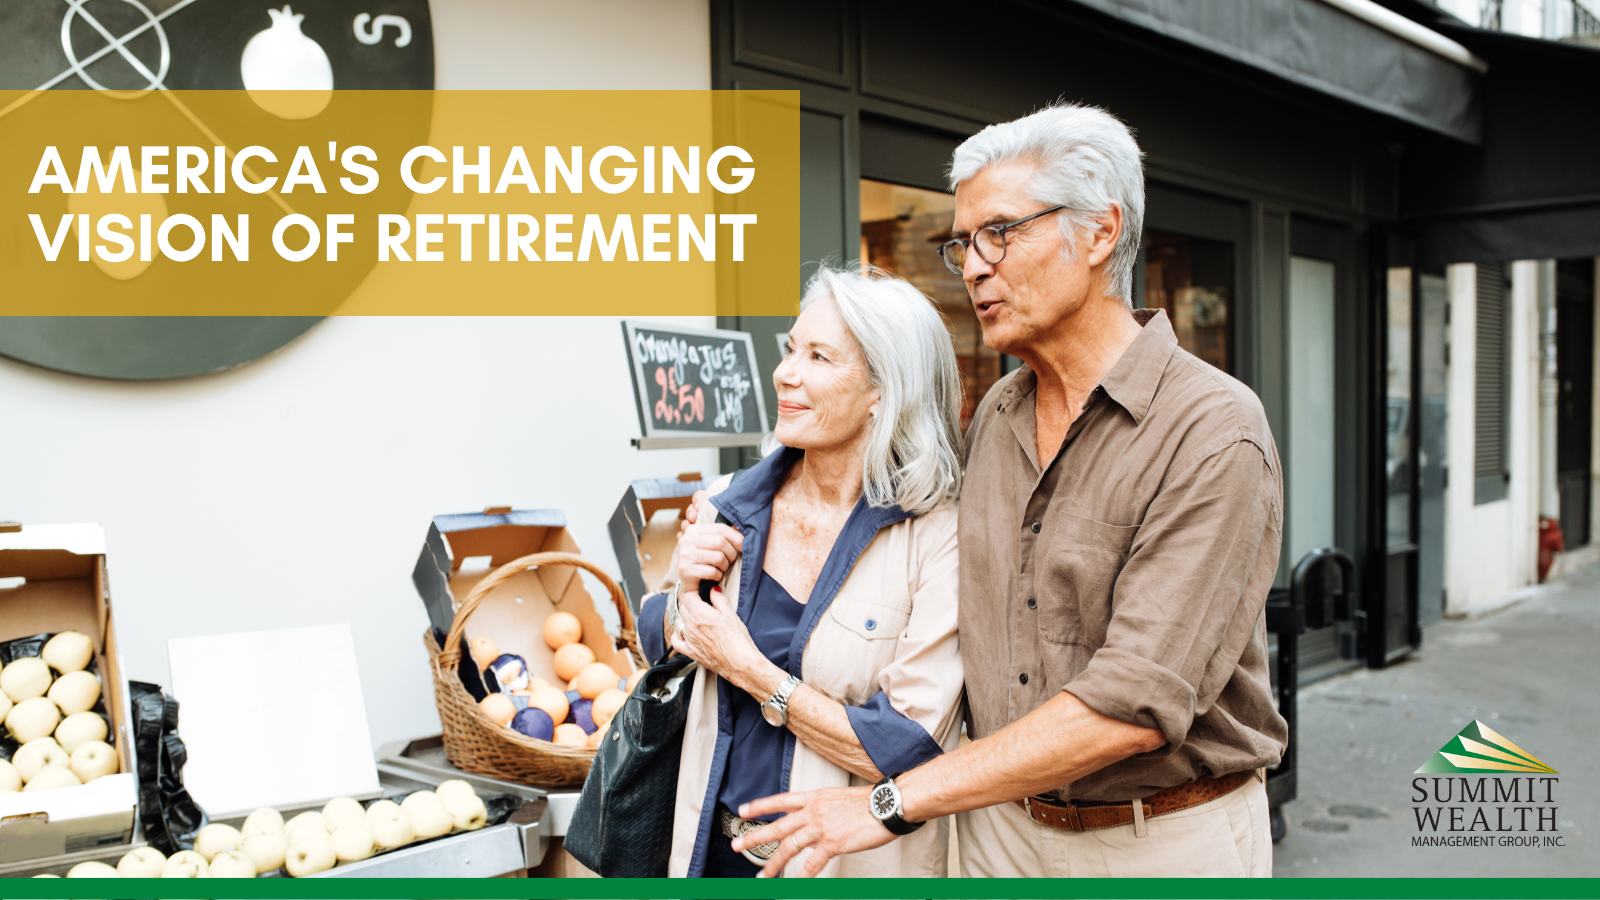 America's Changing Vision of Retirement